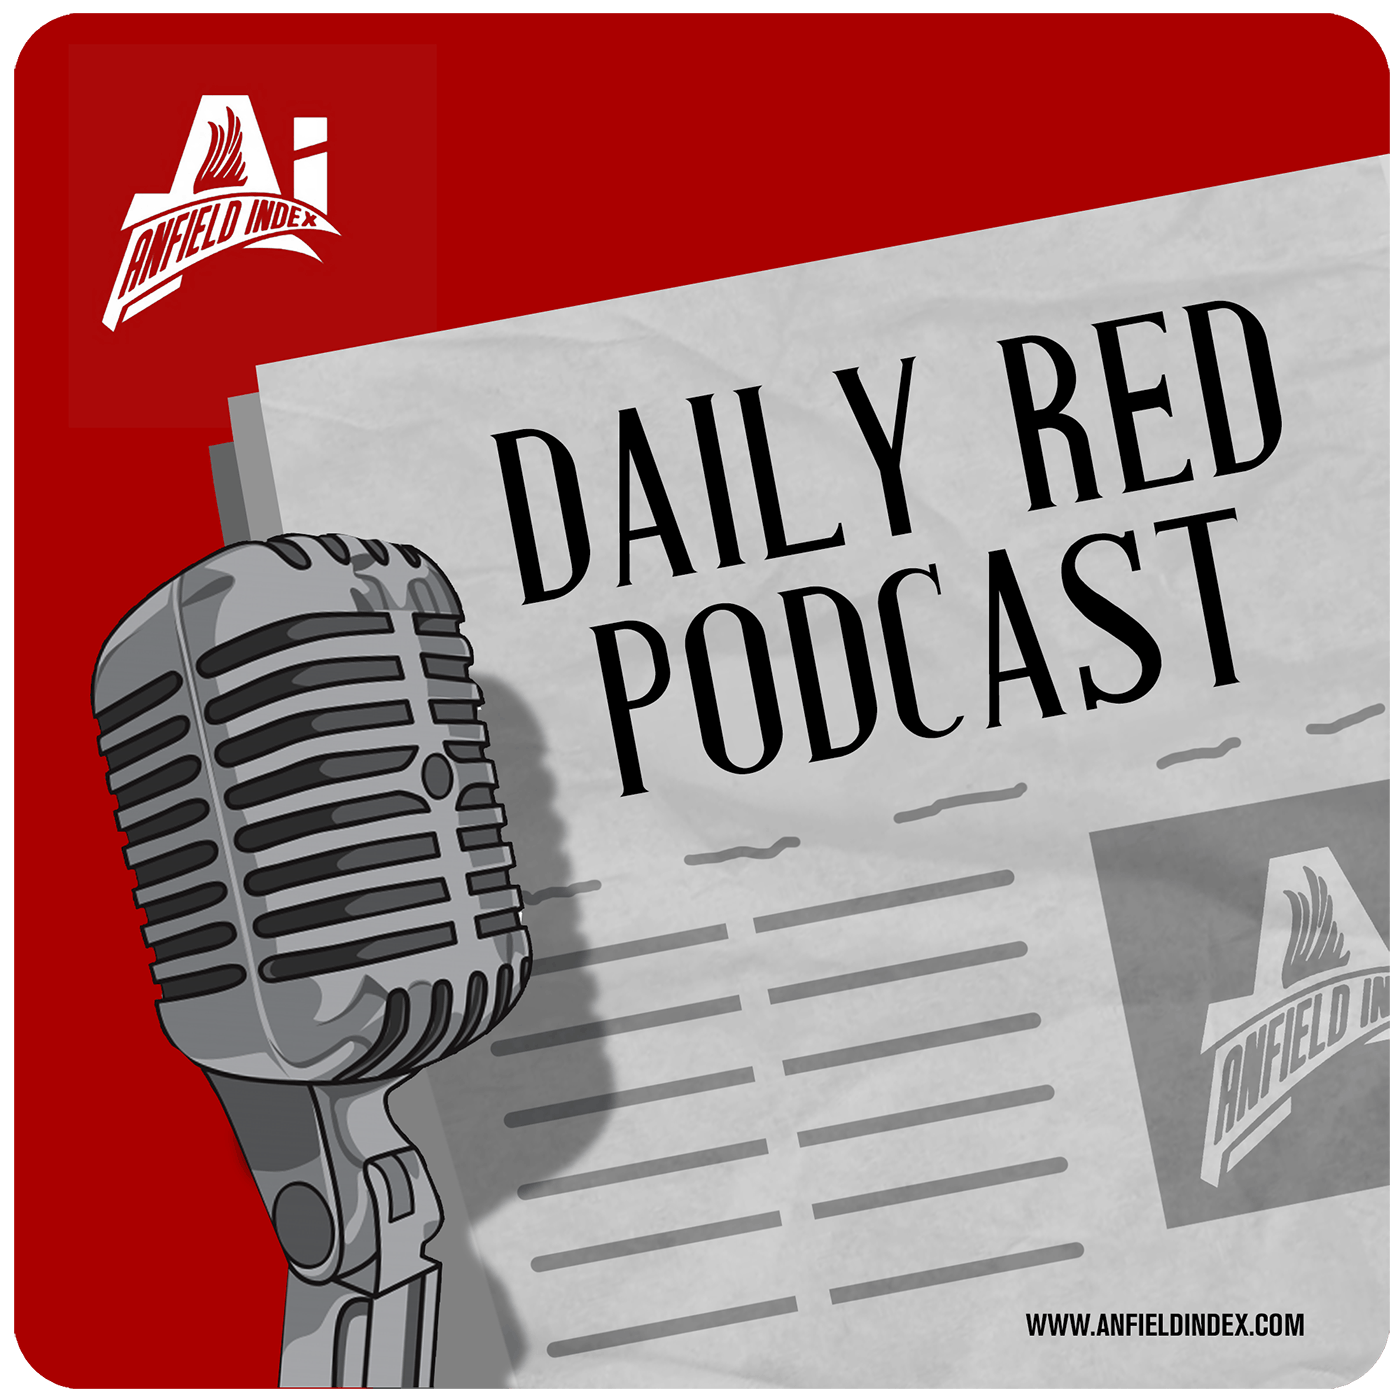 Paul Mitchell Sporting Director? - Daily Red Podcast